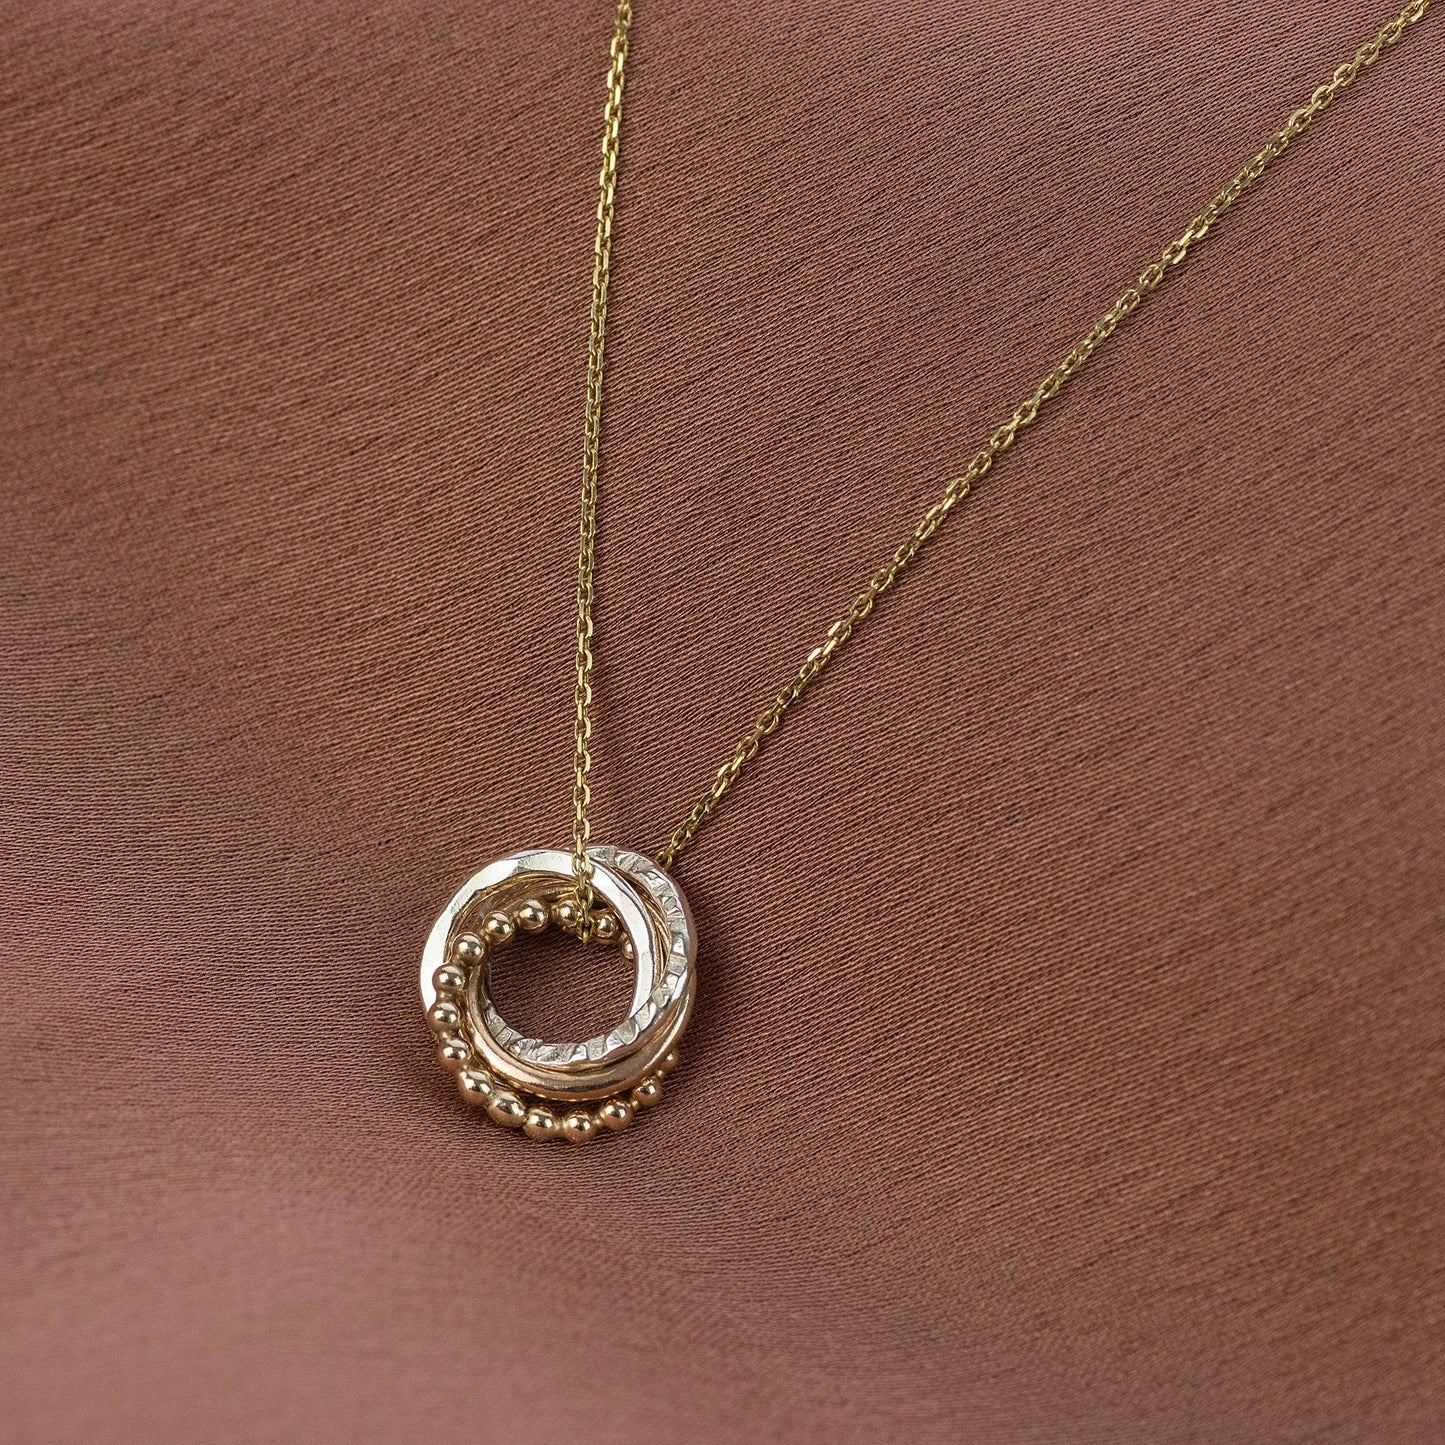 4 Siblings Necklace - 9kt Gold, Rose Gold & Silver Love Knot